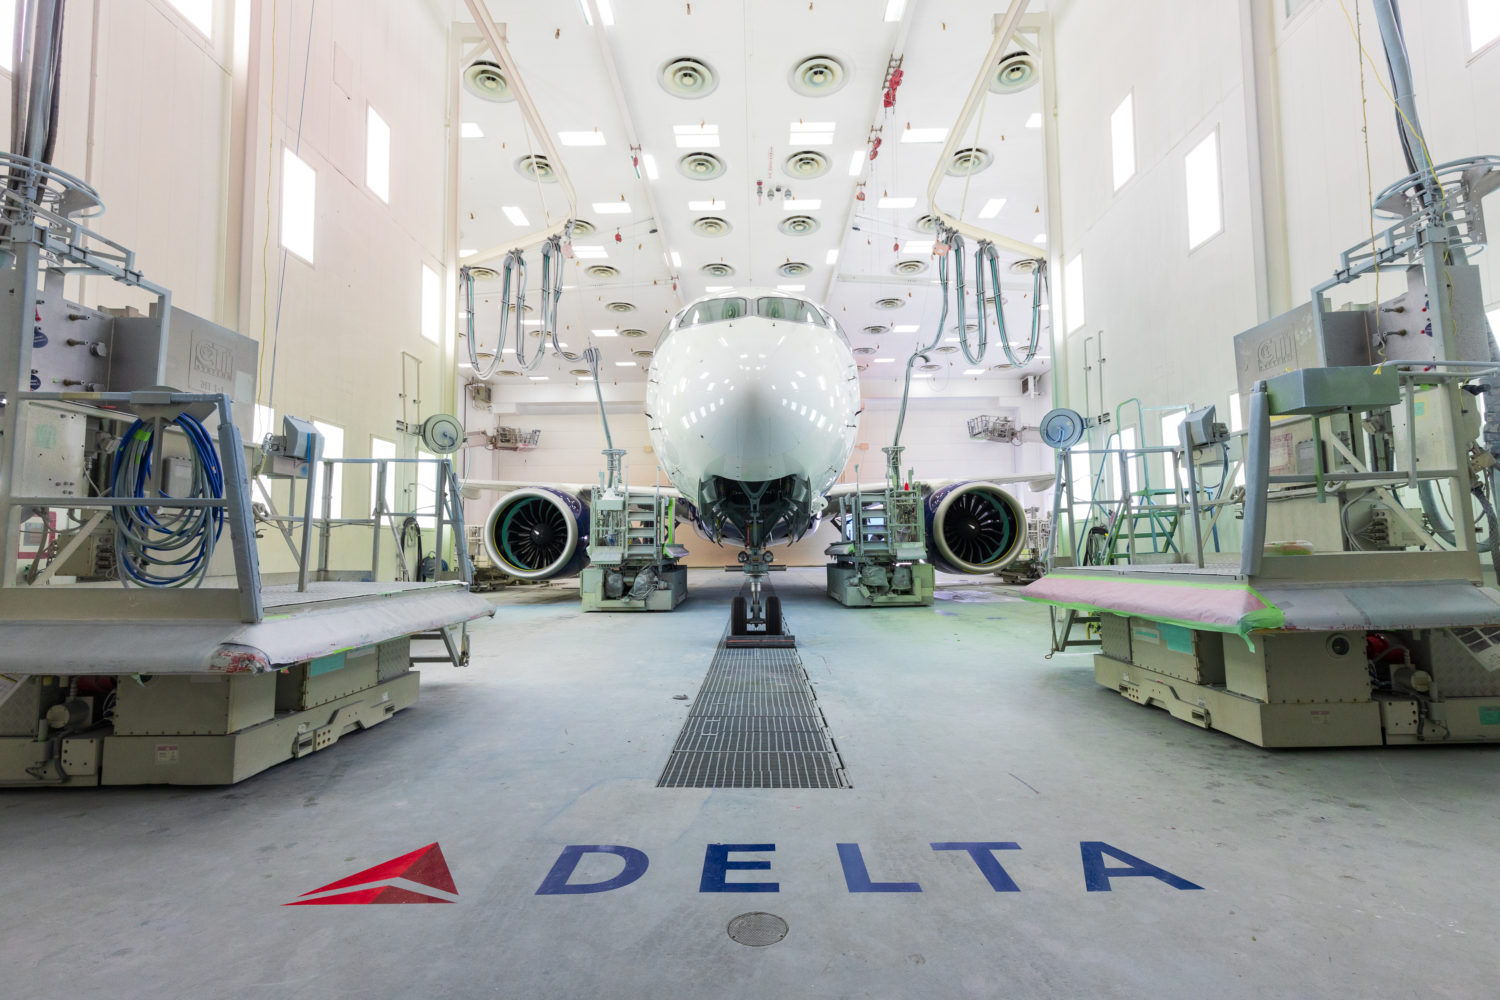 Delta to launch Airbus A220-100 from LaGuardia